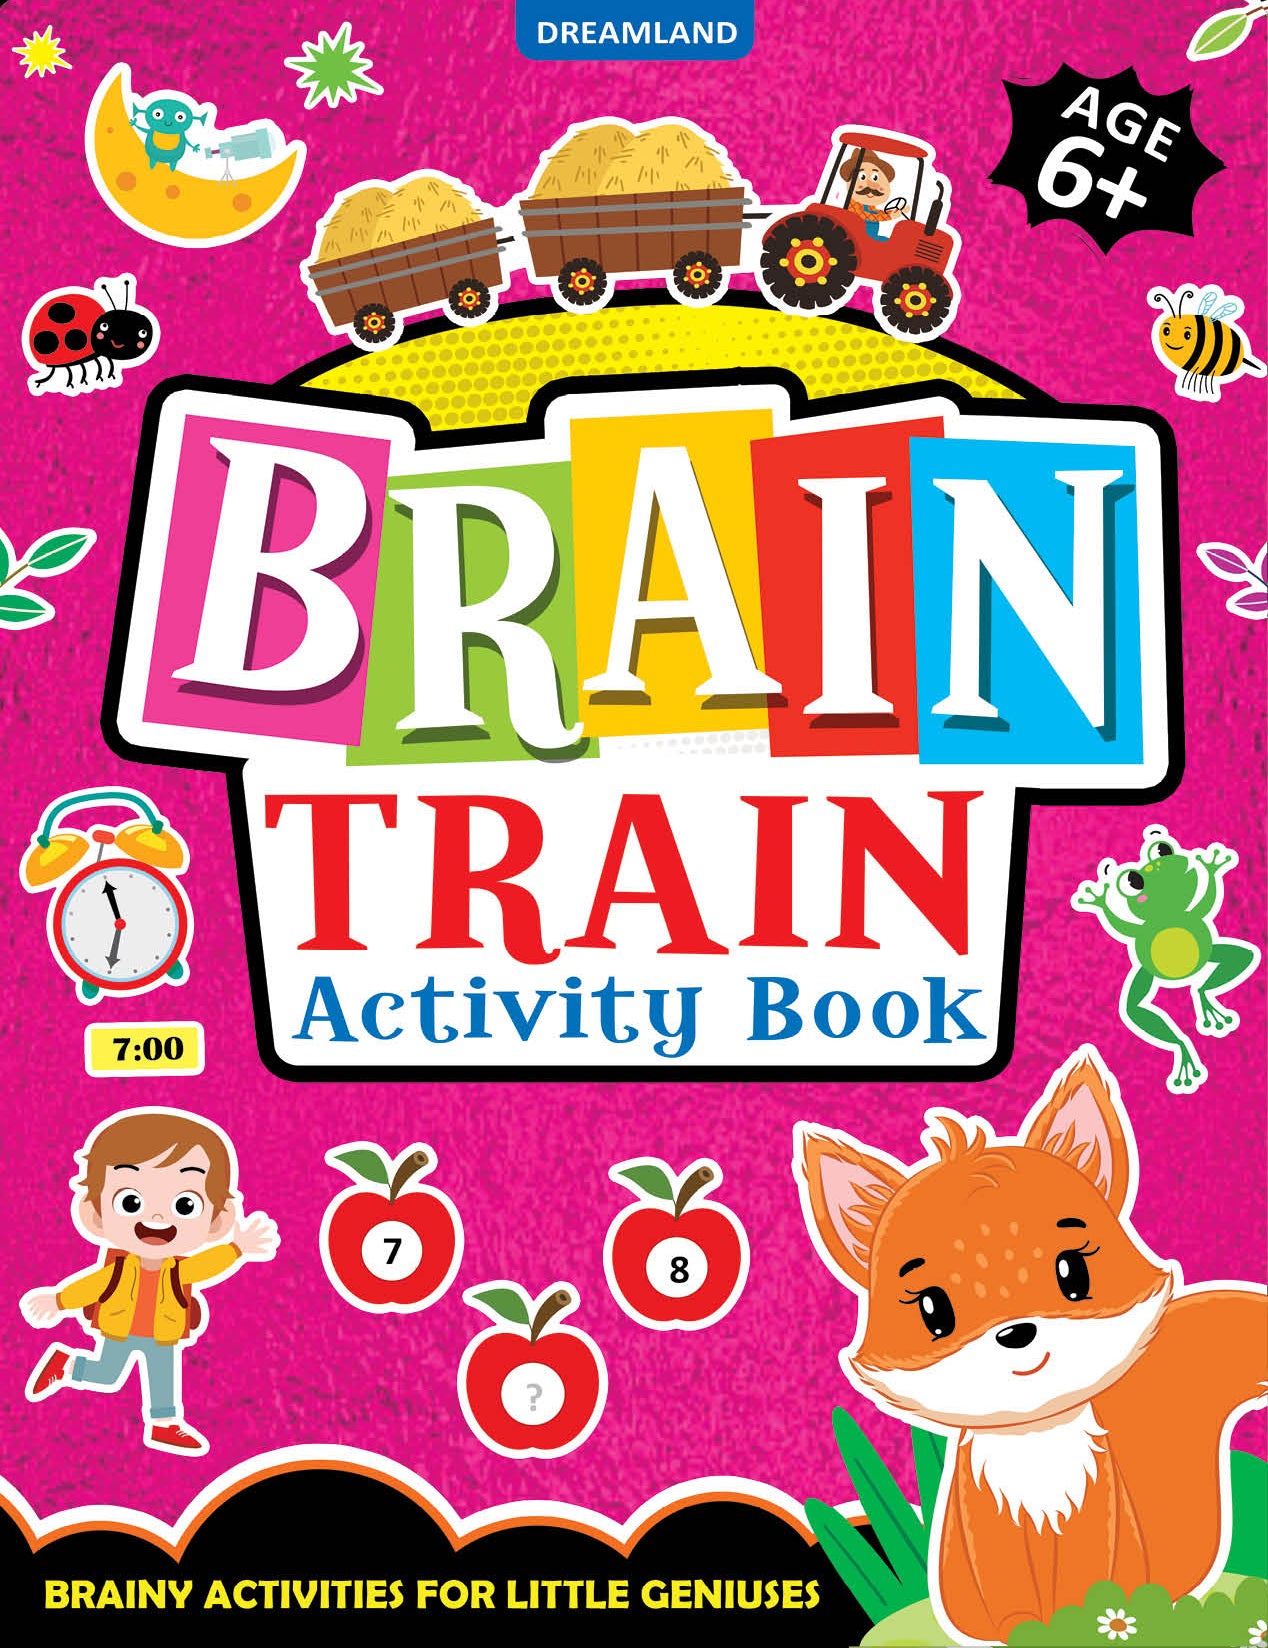 Brain Train Activity Book for Kids Age 6+ – With Colouring Pages, Mazes, Puzzles and Word searches Activities